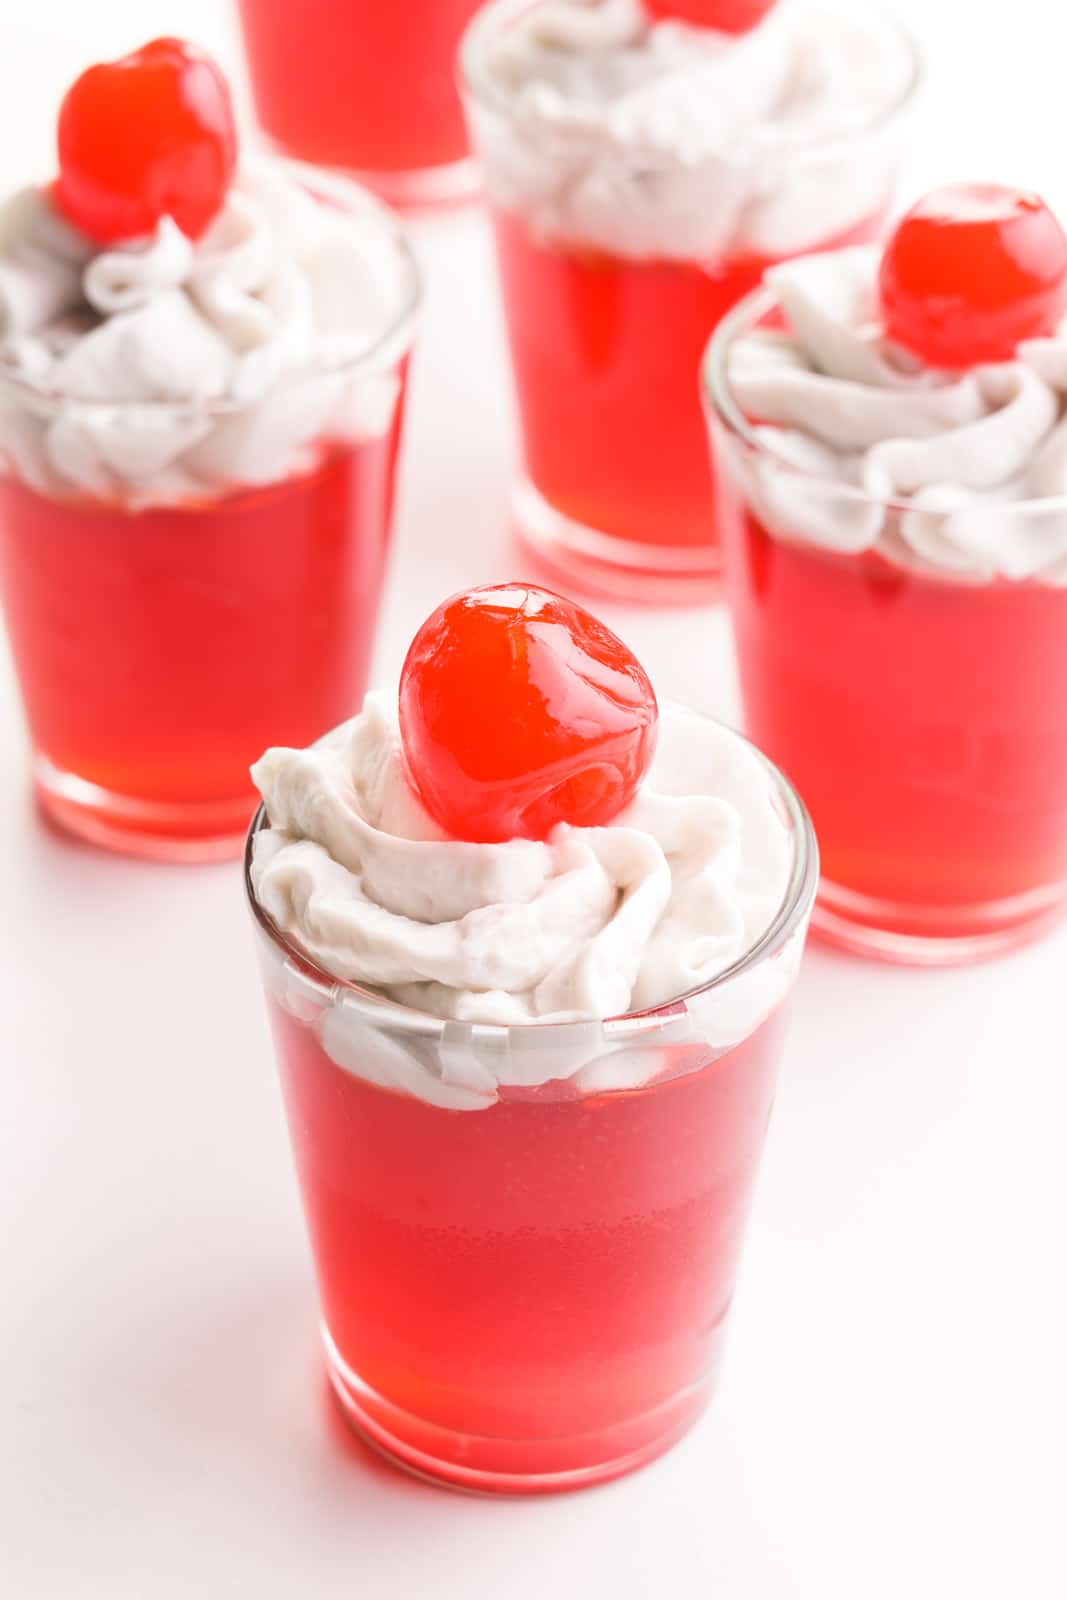 Several jello shots sit next to each other. They each have whipped cream on top and maraschino cherries.